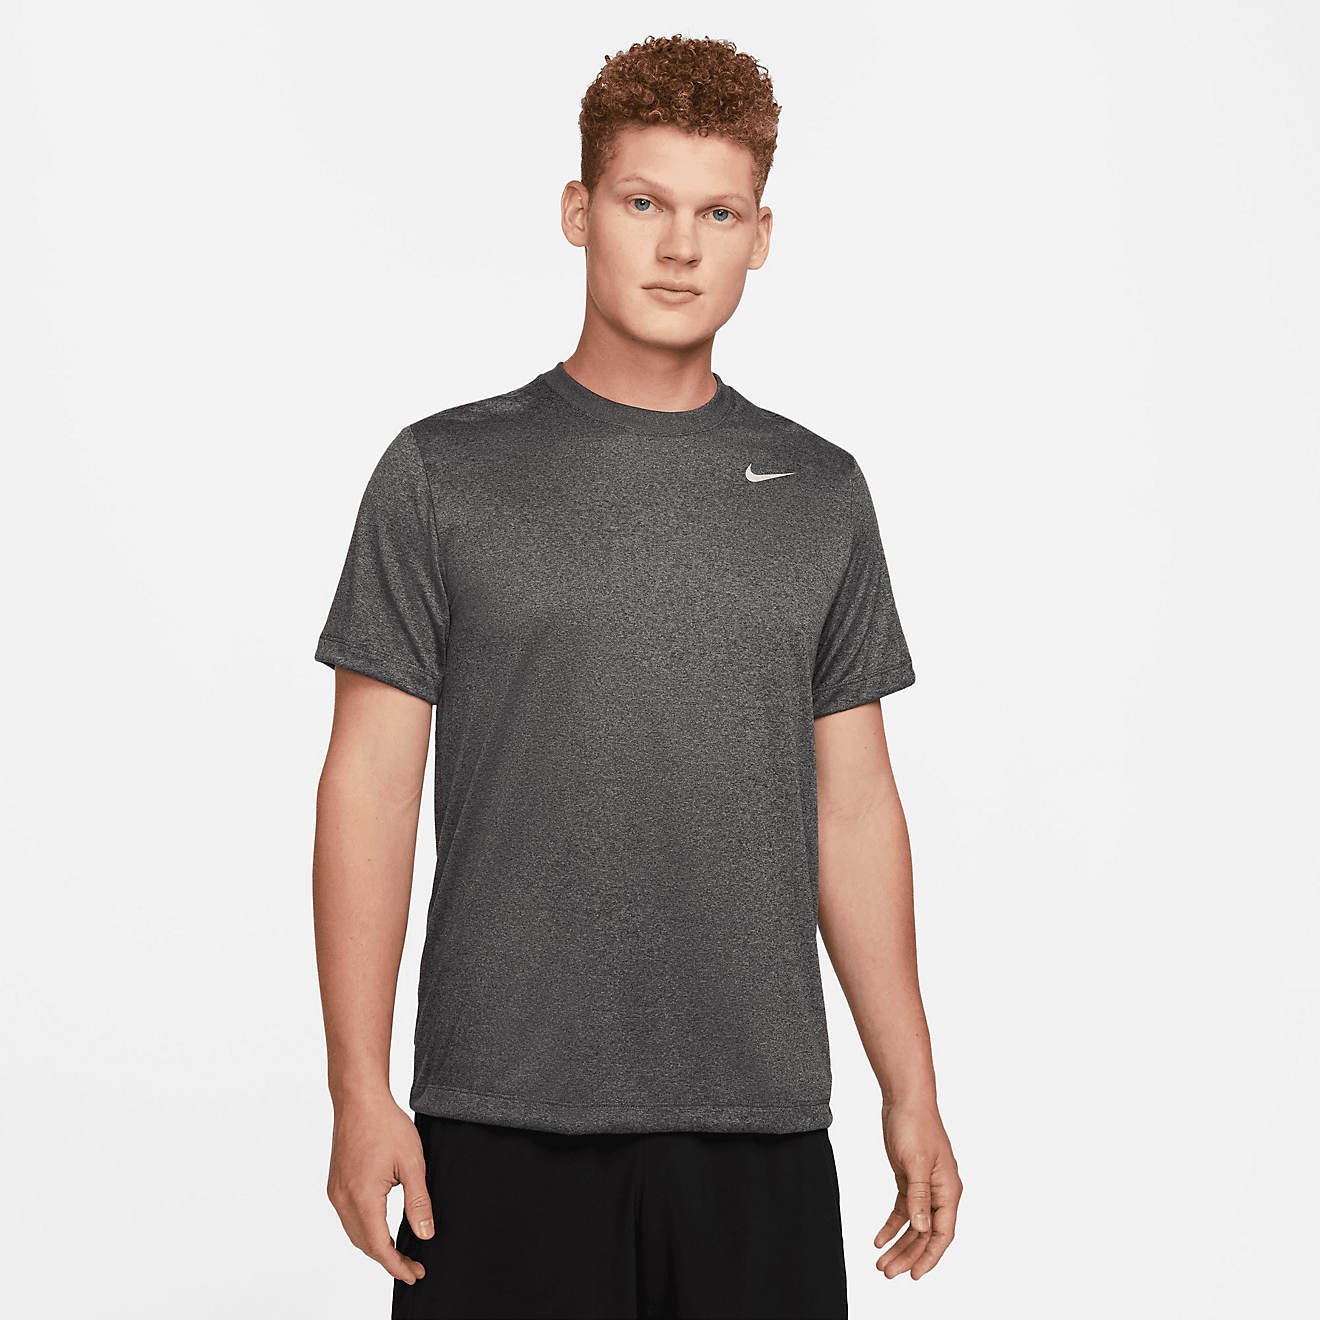 Nike Men’s Dri-FIT Fitness T-shirt | Free Shipping at Academy